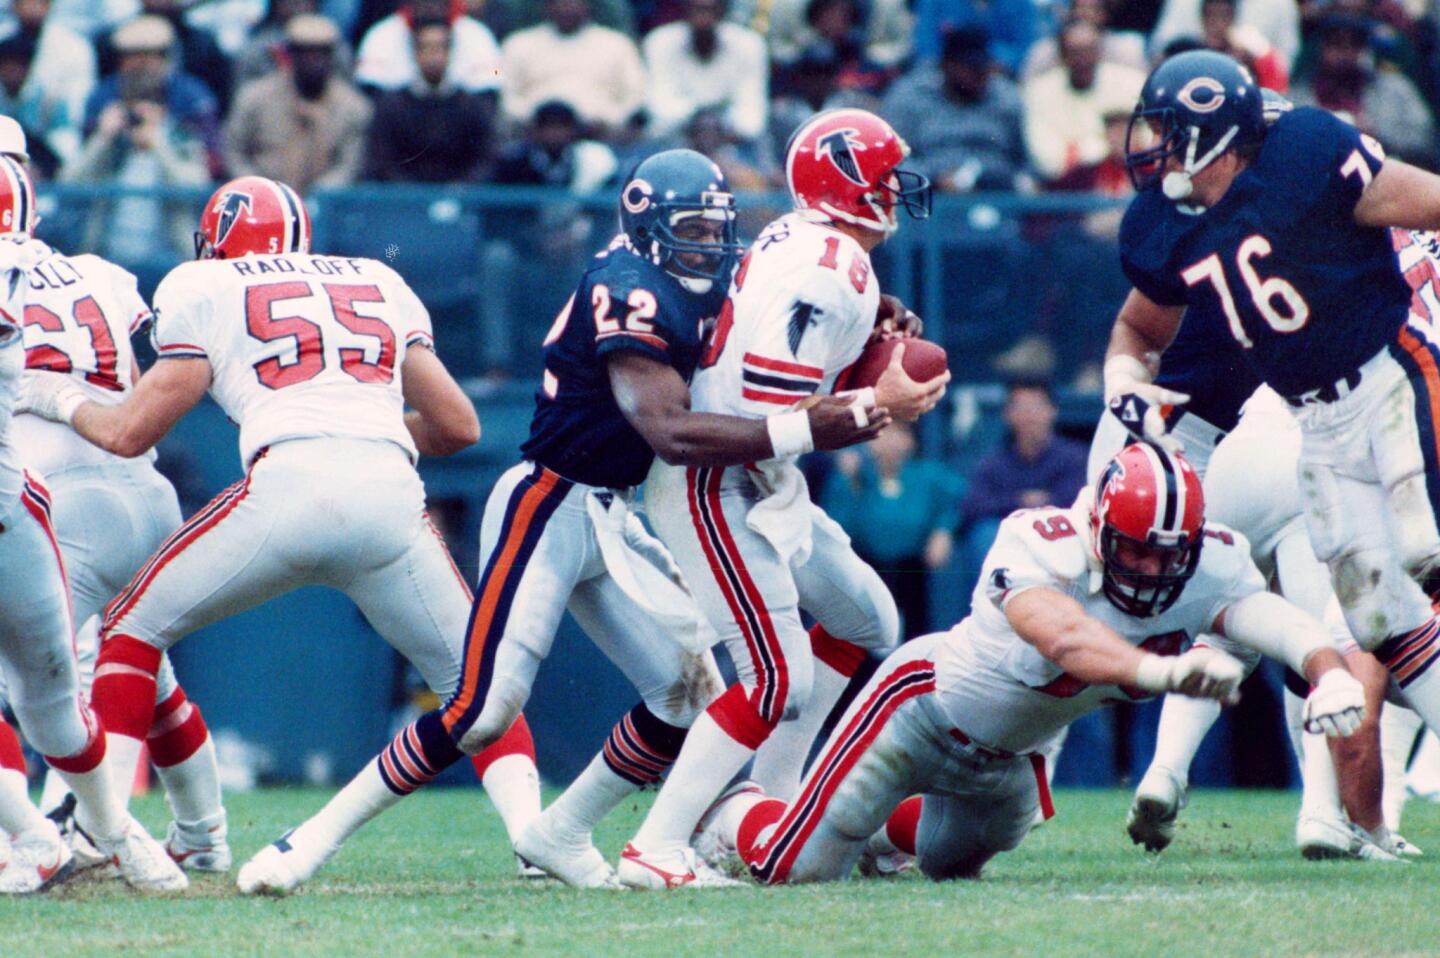 ASSET_BARCODE: AFF-920-CT ## DESCRIPTION: Chicago Bears ## EXTENDED_DESCRIPTION: November 1986 ## CAPTION: Bears slip past Falcons -- Two sacks and an interception by safety Dave Duerson [22] help the Bears edge the Atlanta Falcons 13-10. Chicago Tribune photo by Ed Wagner Jr. published November 17, 1986